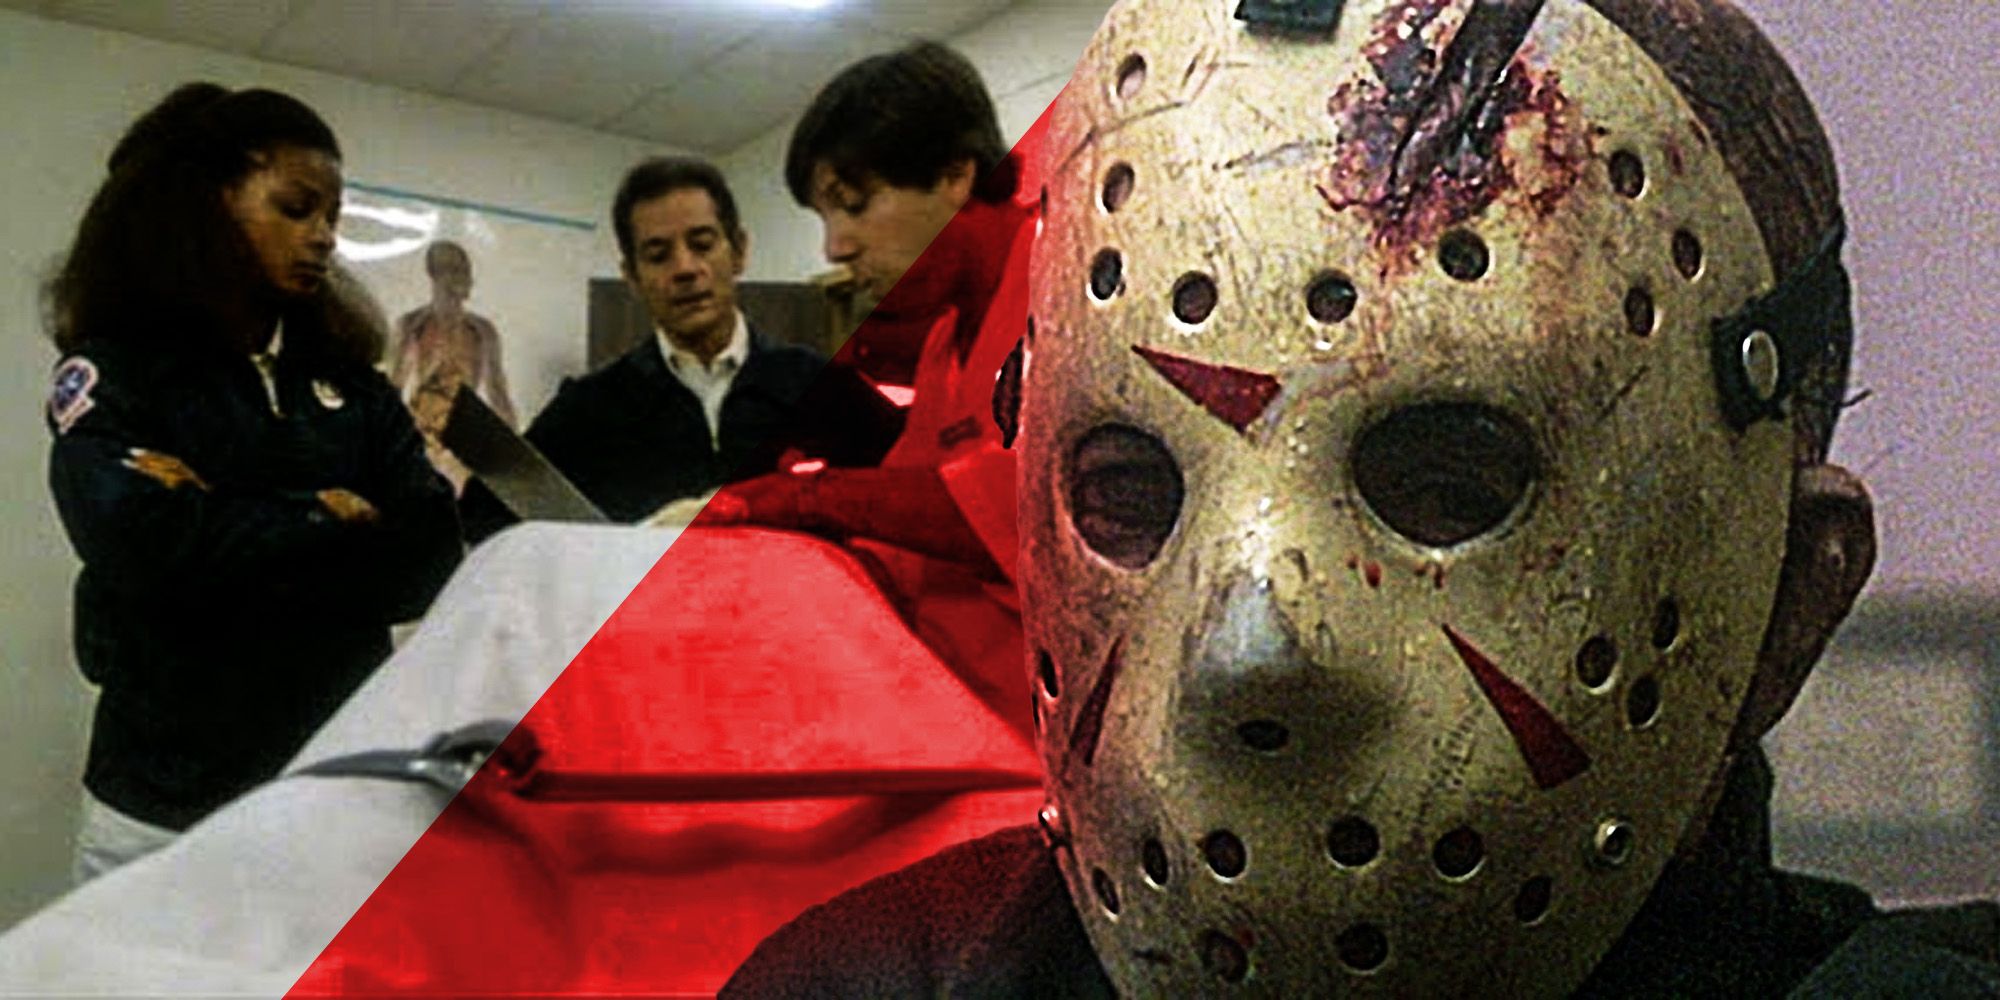 How Friday The 13th Part 4 Makes Viewers Complicit In Jasons Rampage